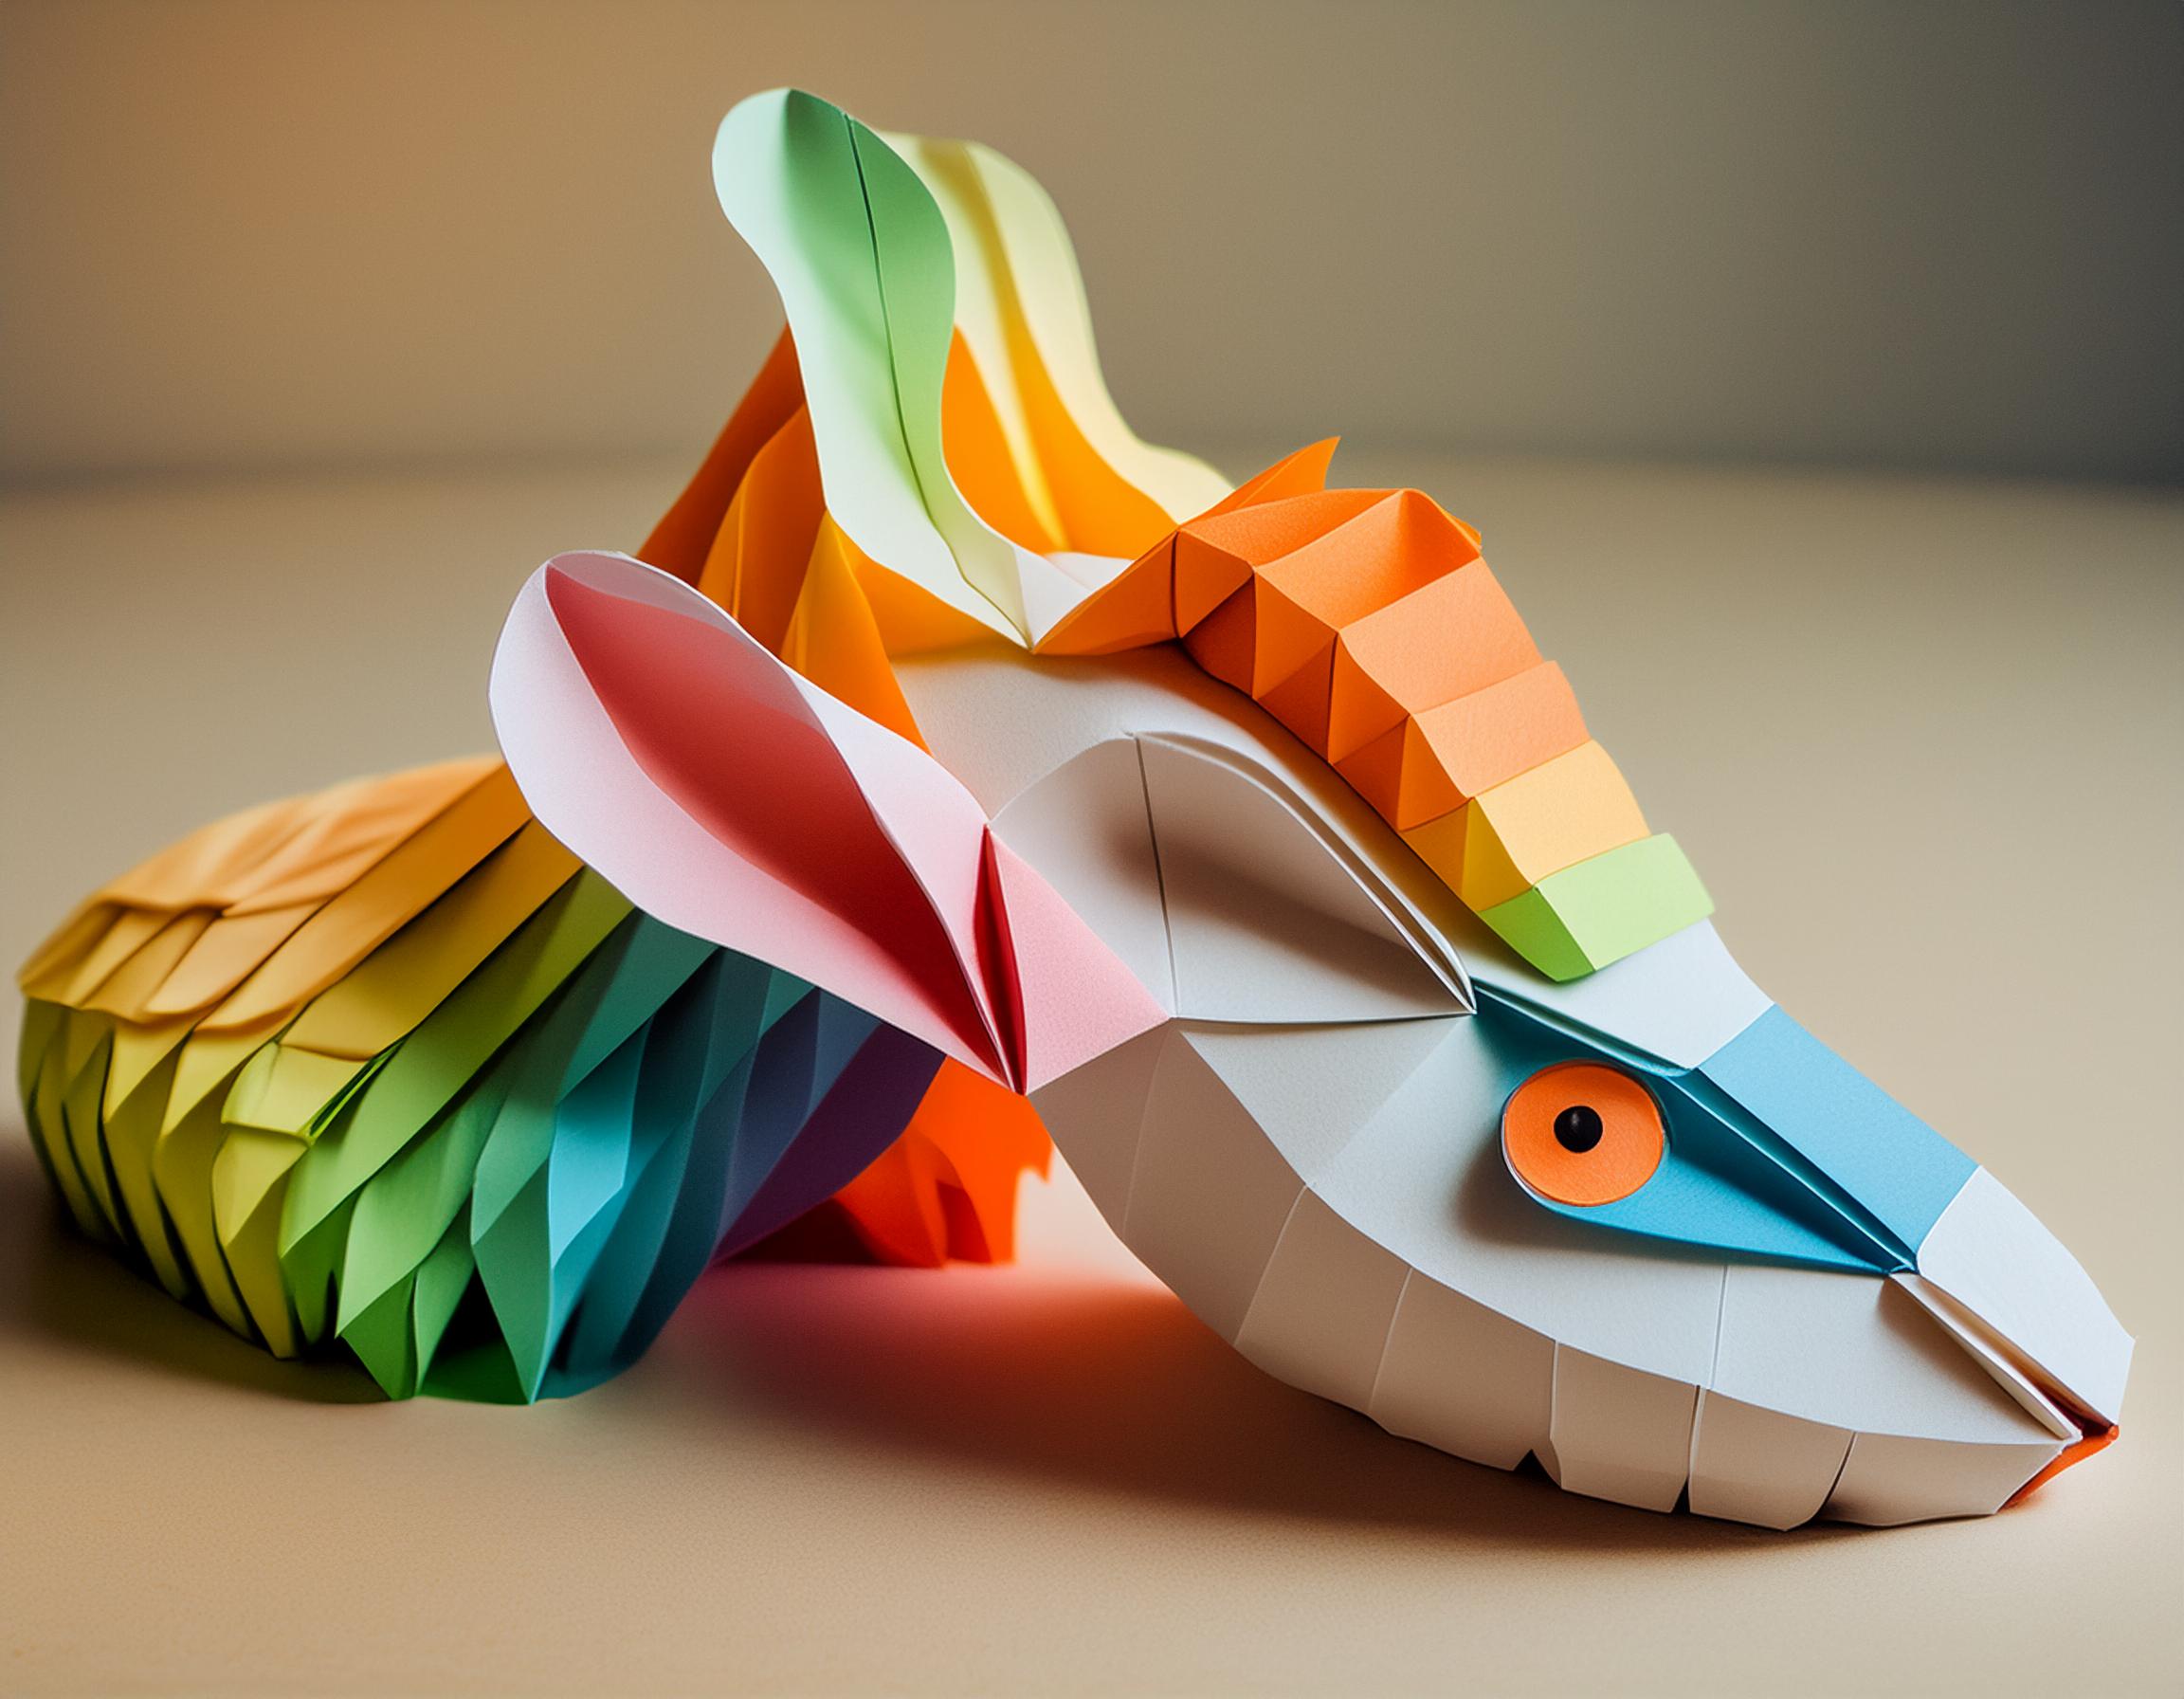 Adobe Firefly A bunny made of variety of colors, origami